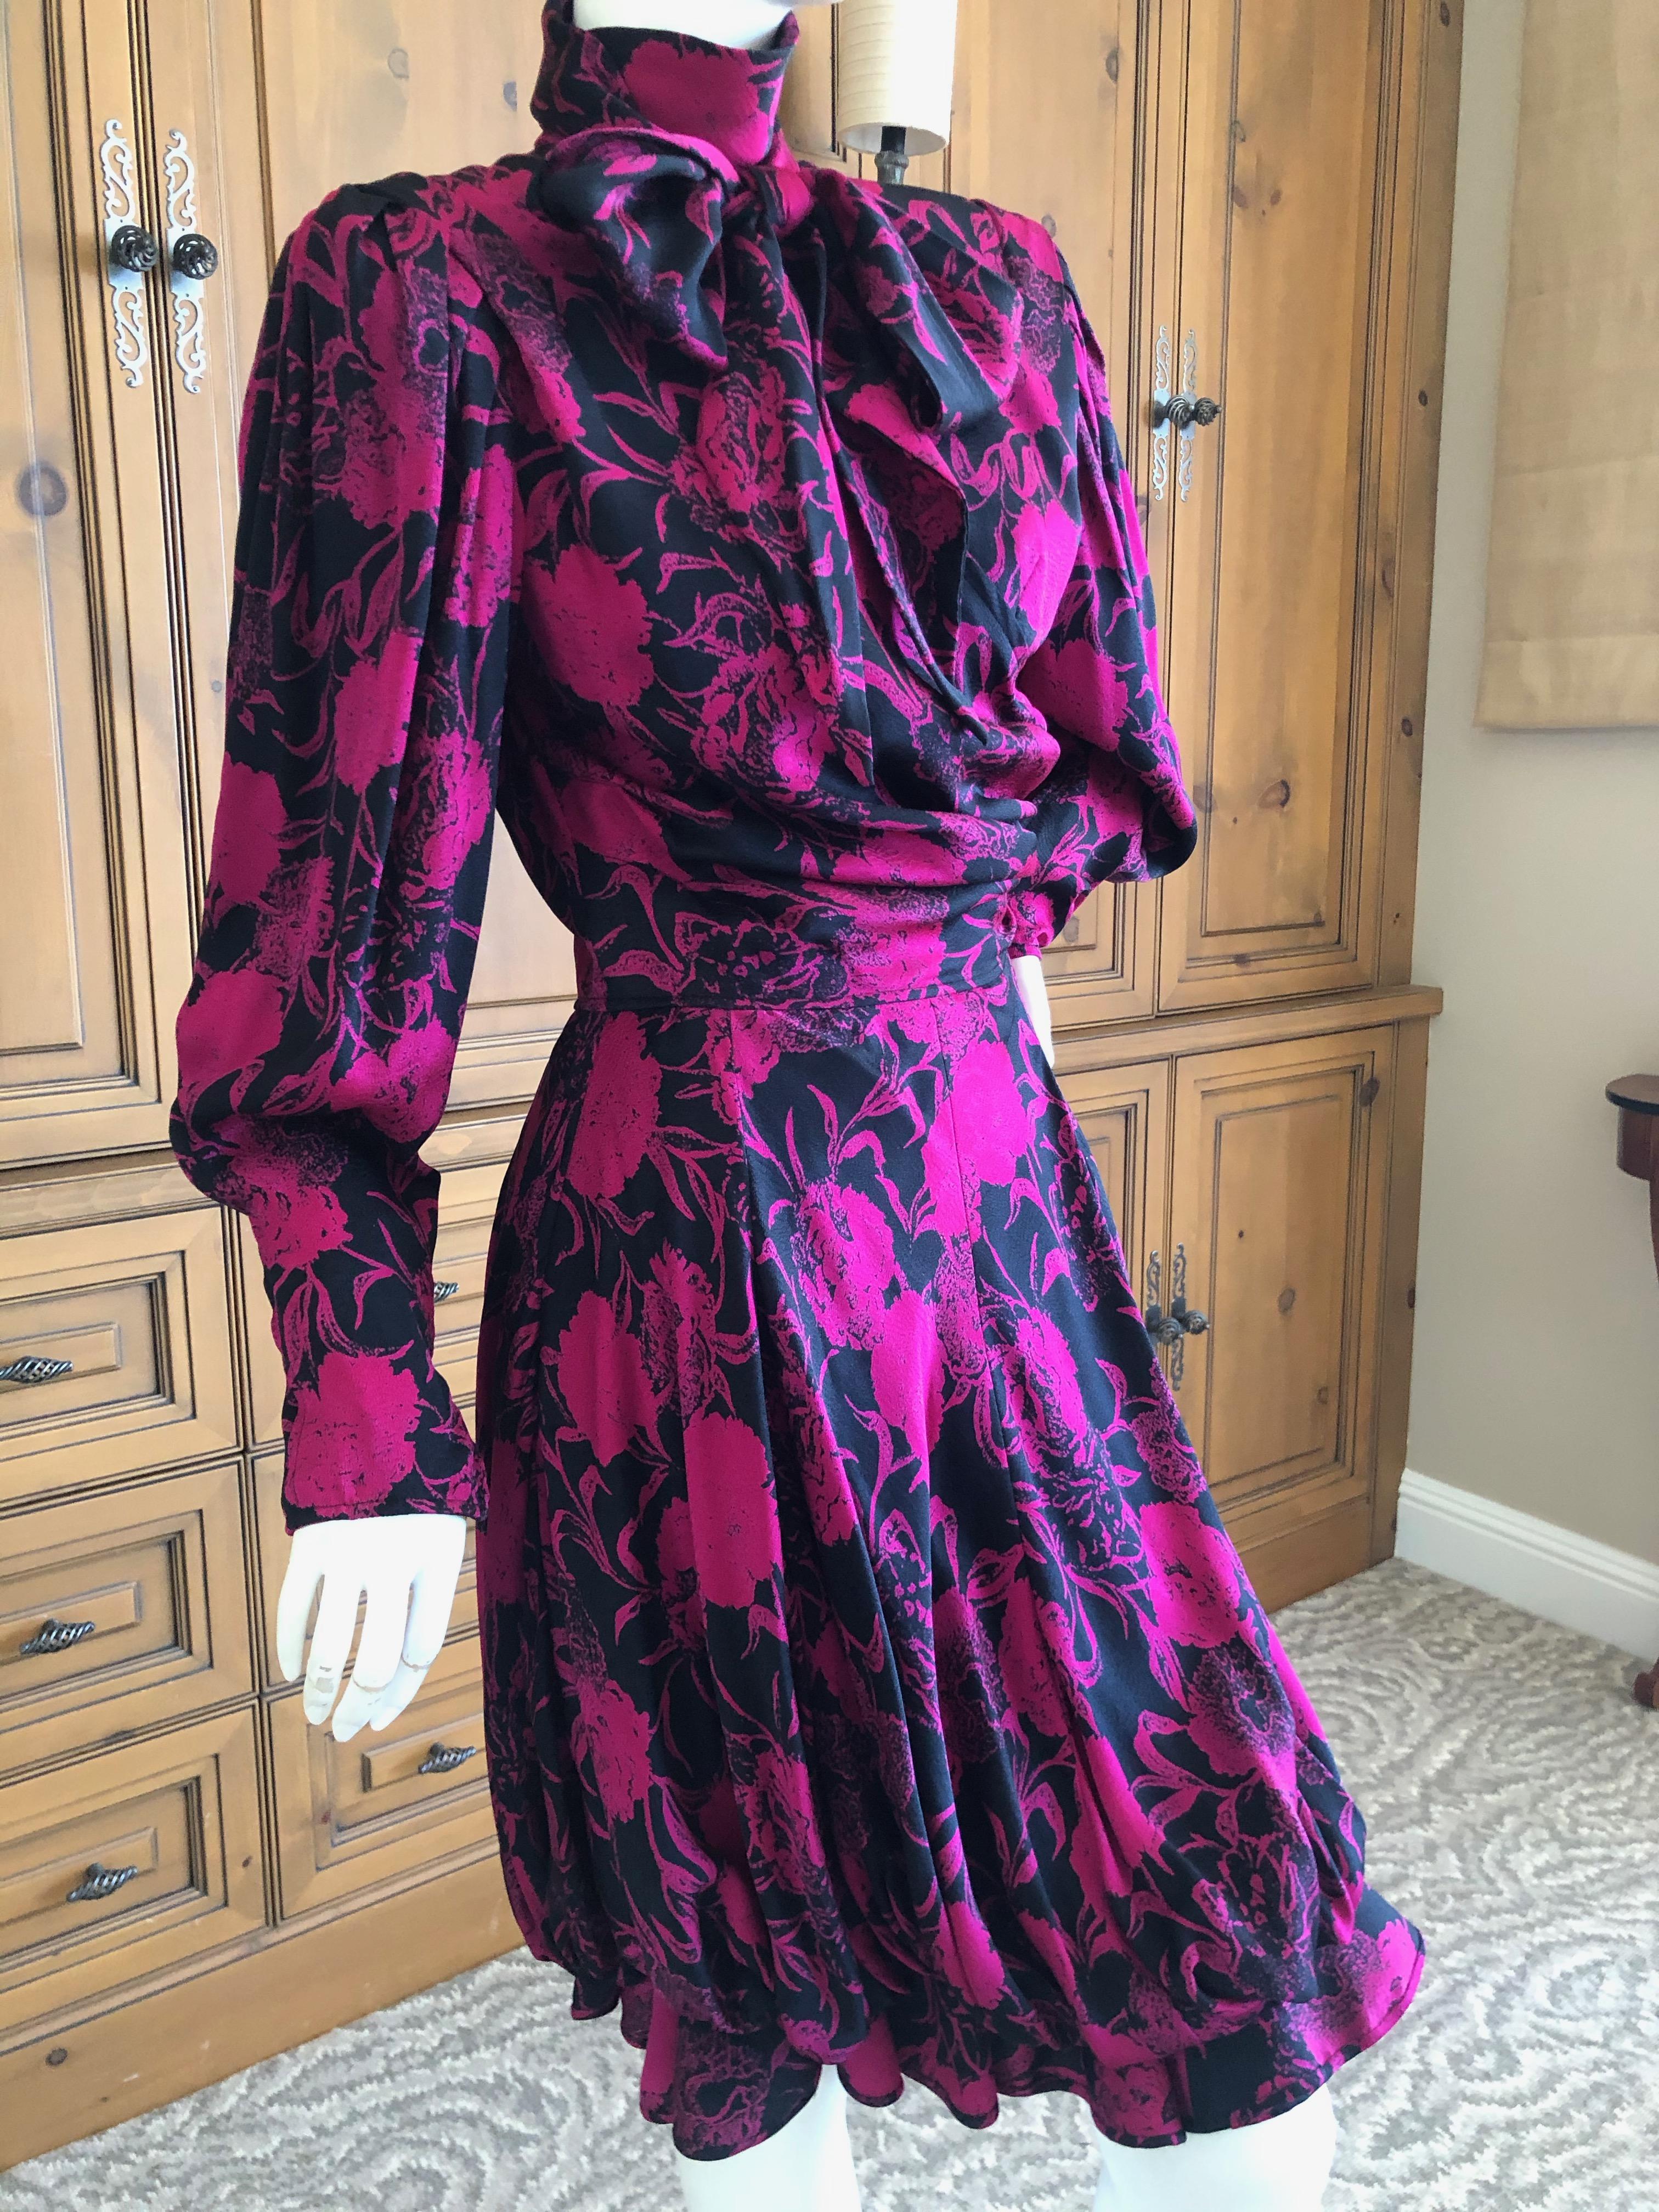 Emanuel Ungaro Parallel Fall 1985 Strong Shoulder Silk Dress with Pussy Bow In Excellent Condition For Sale In Cloverdale, CA